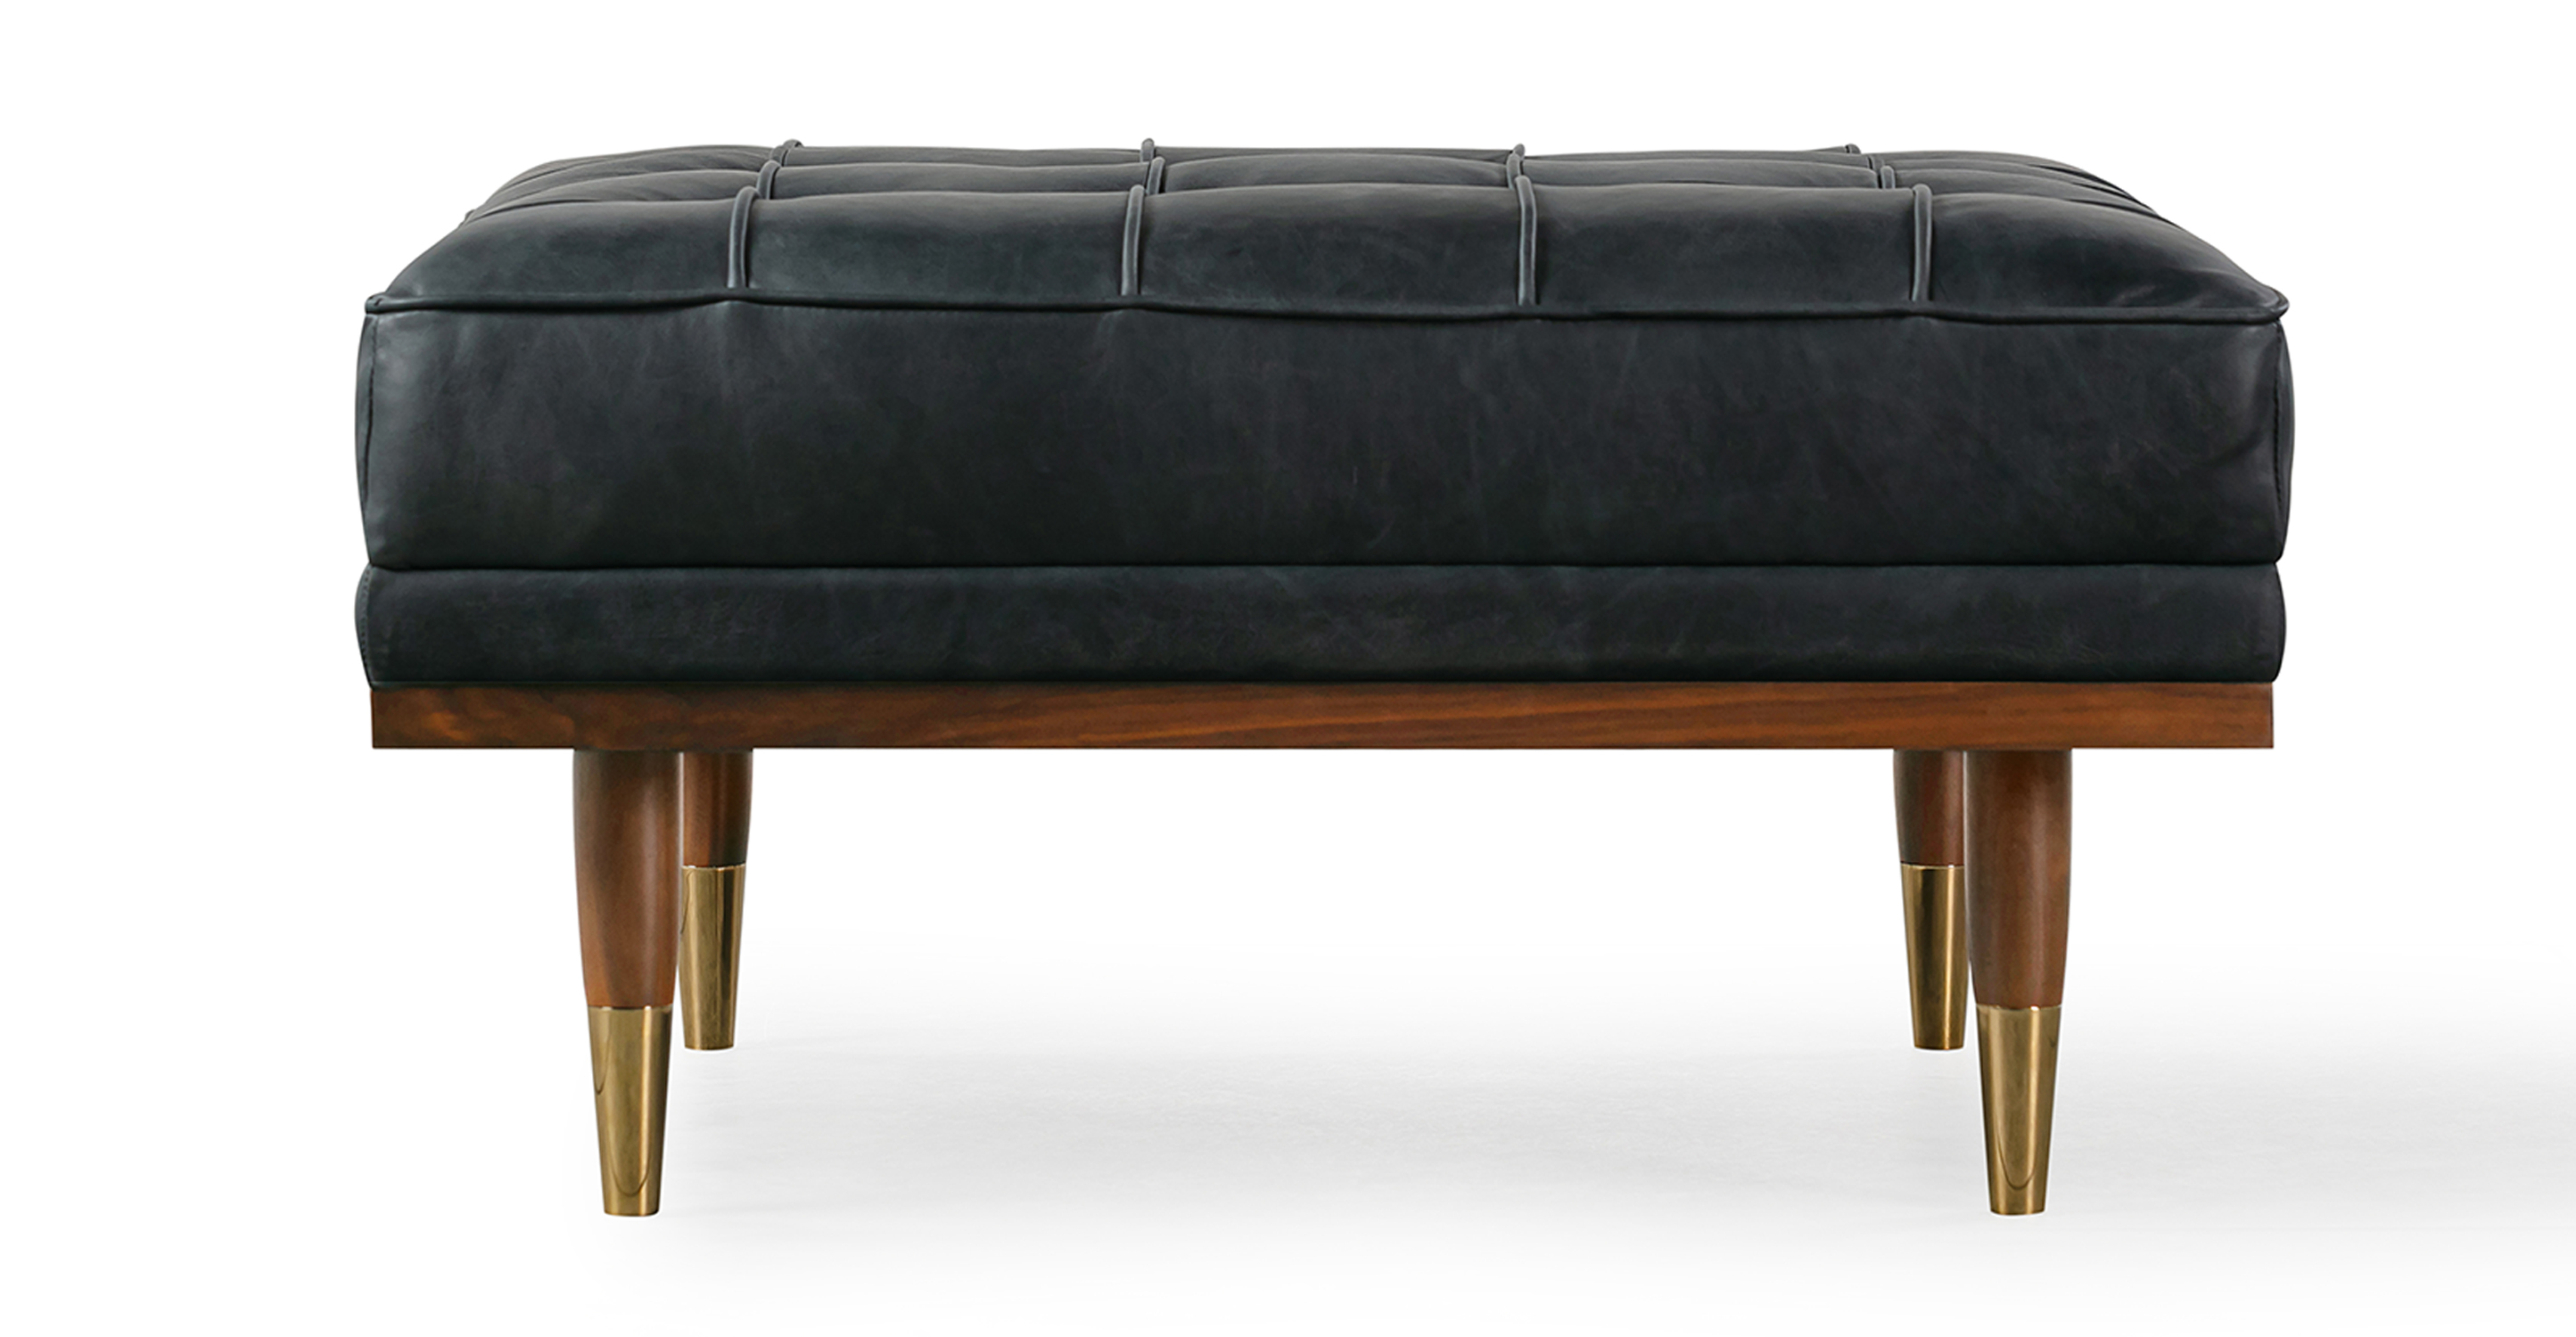 Image shows side picture of Mid-Century Modern Woodrow Box Ottoman in Milano Black Leather. Frame and legs are walnut wood. Legs are brass tipped walnut wood. The cushion is button tufted. 